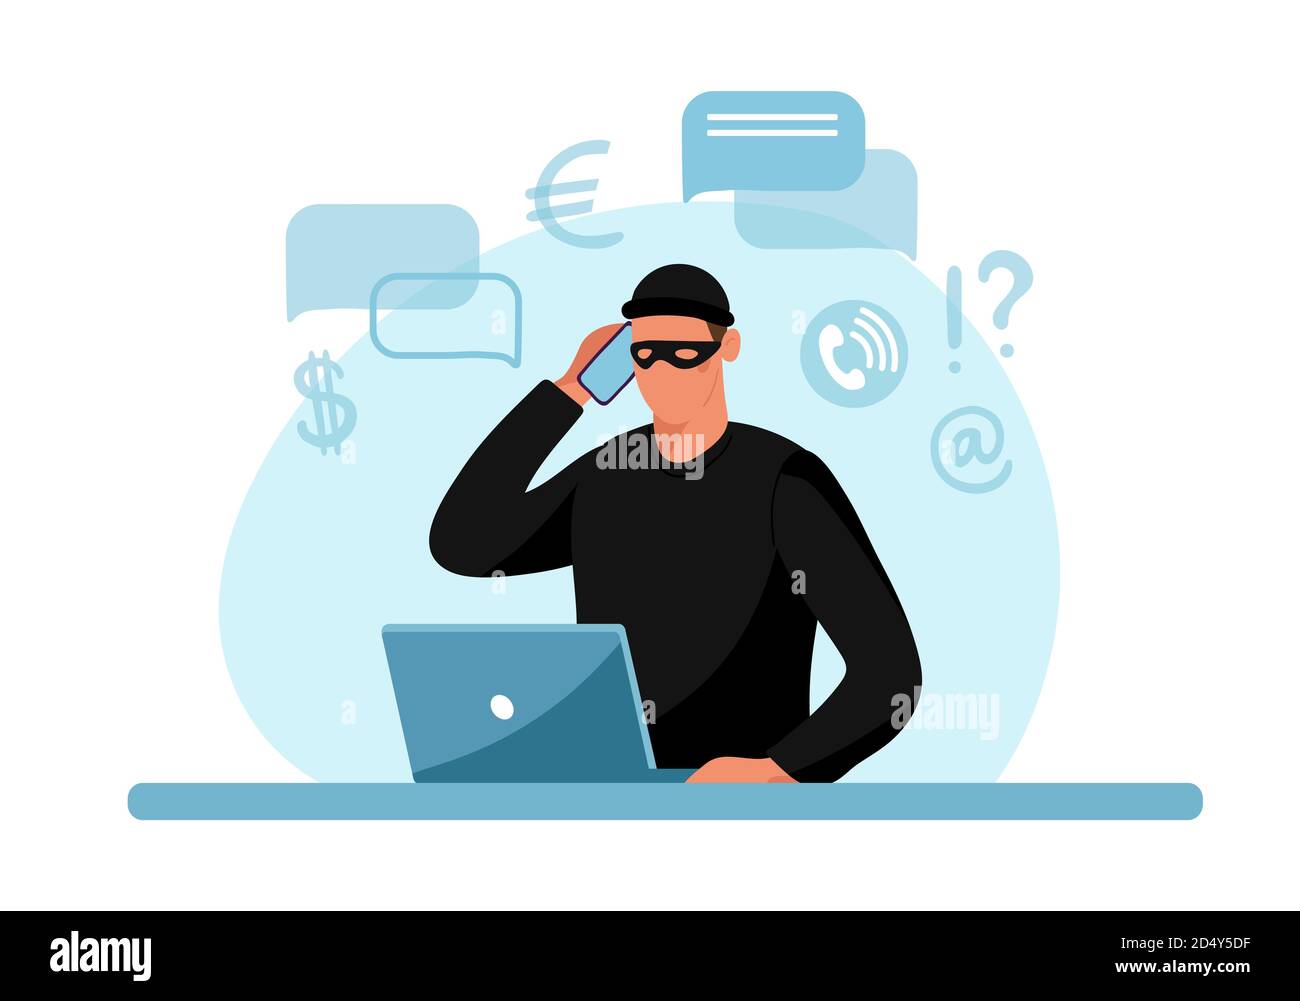 Internet phone crime. Conceptual illustration of online internet fraud, cybercrime, data hacking. Cartoon design isolated on white background. Flat vector illustration Stock Vector